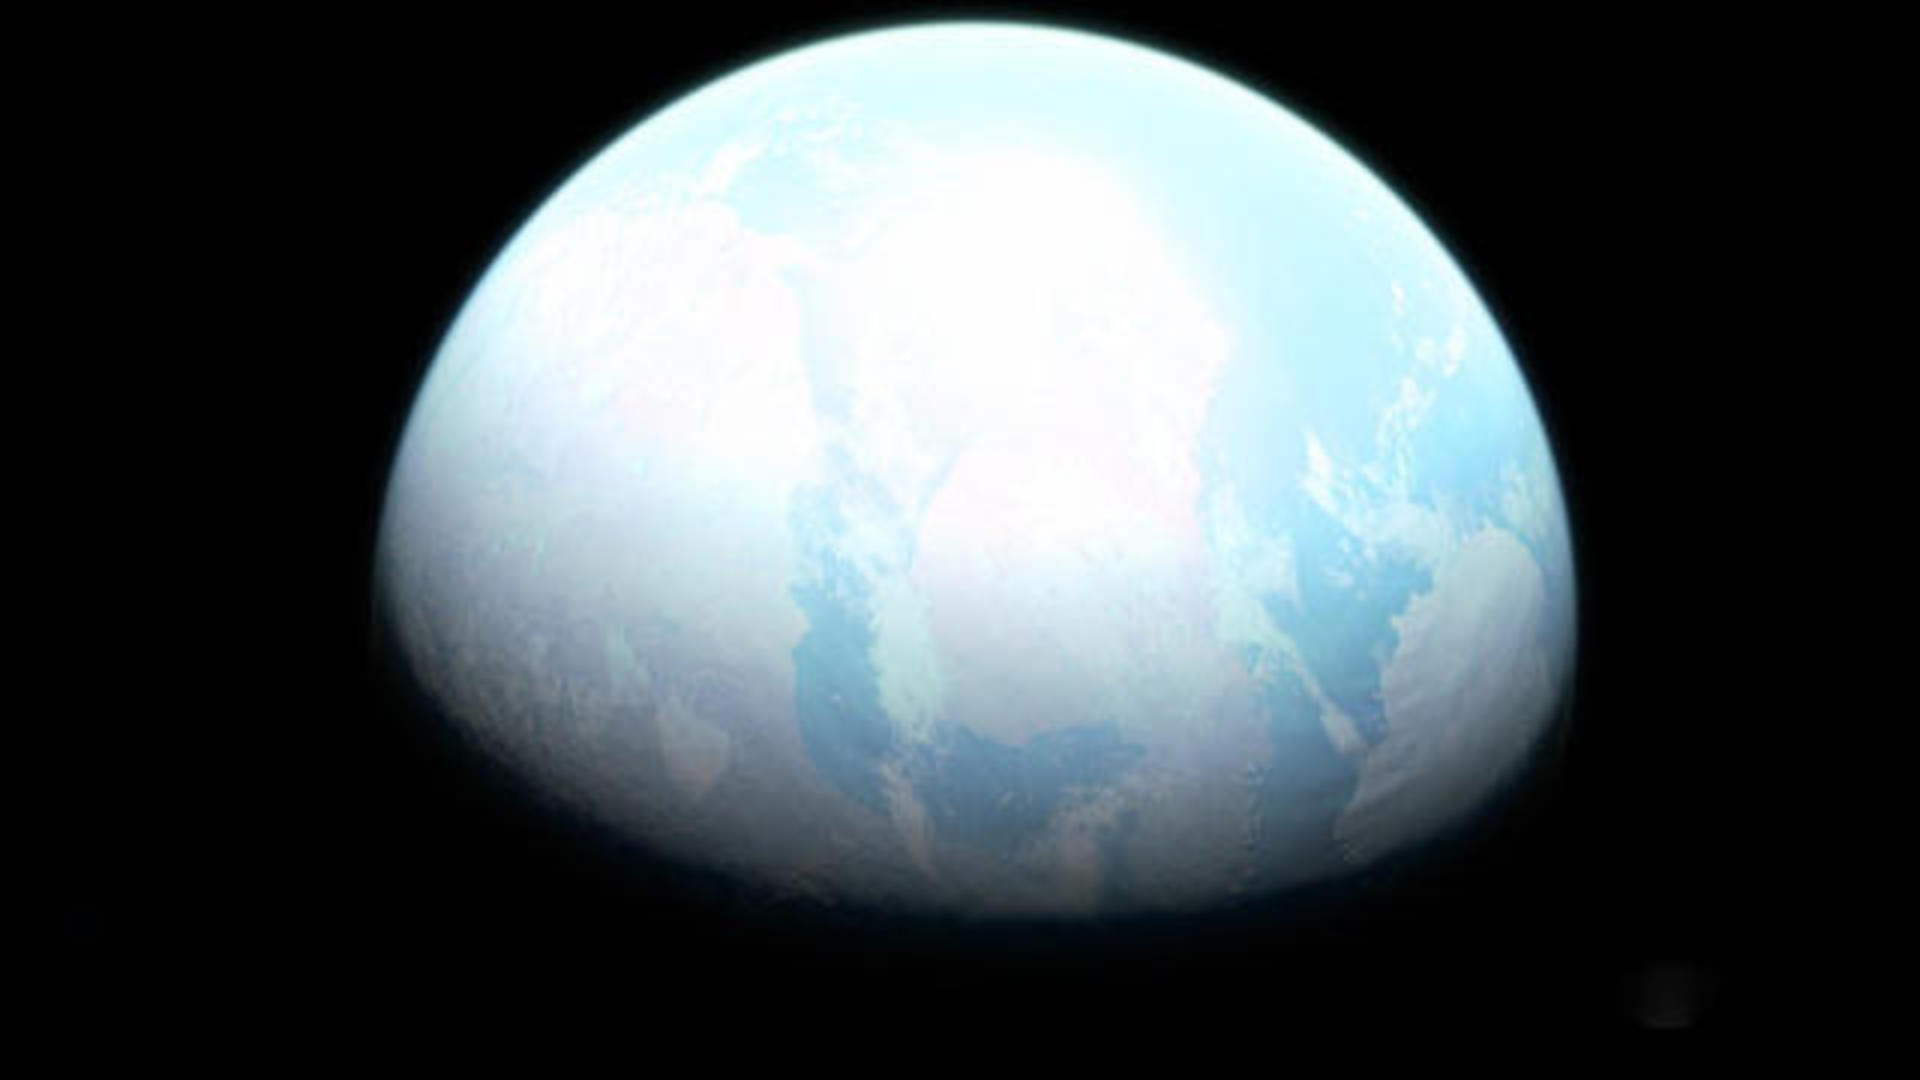 Potentially habitable super-Earth discovered - CBS News